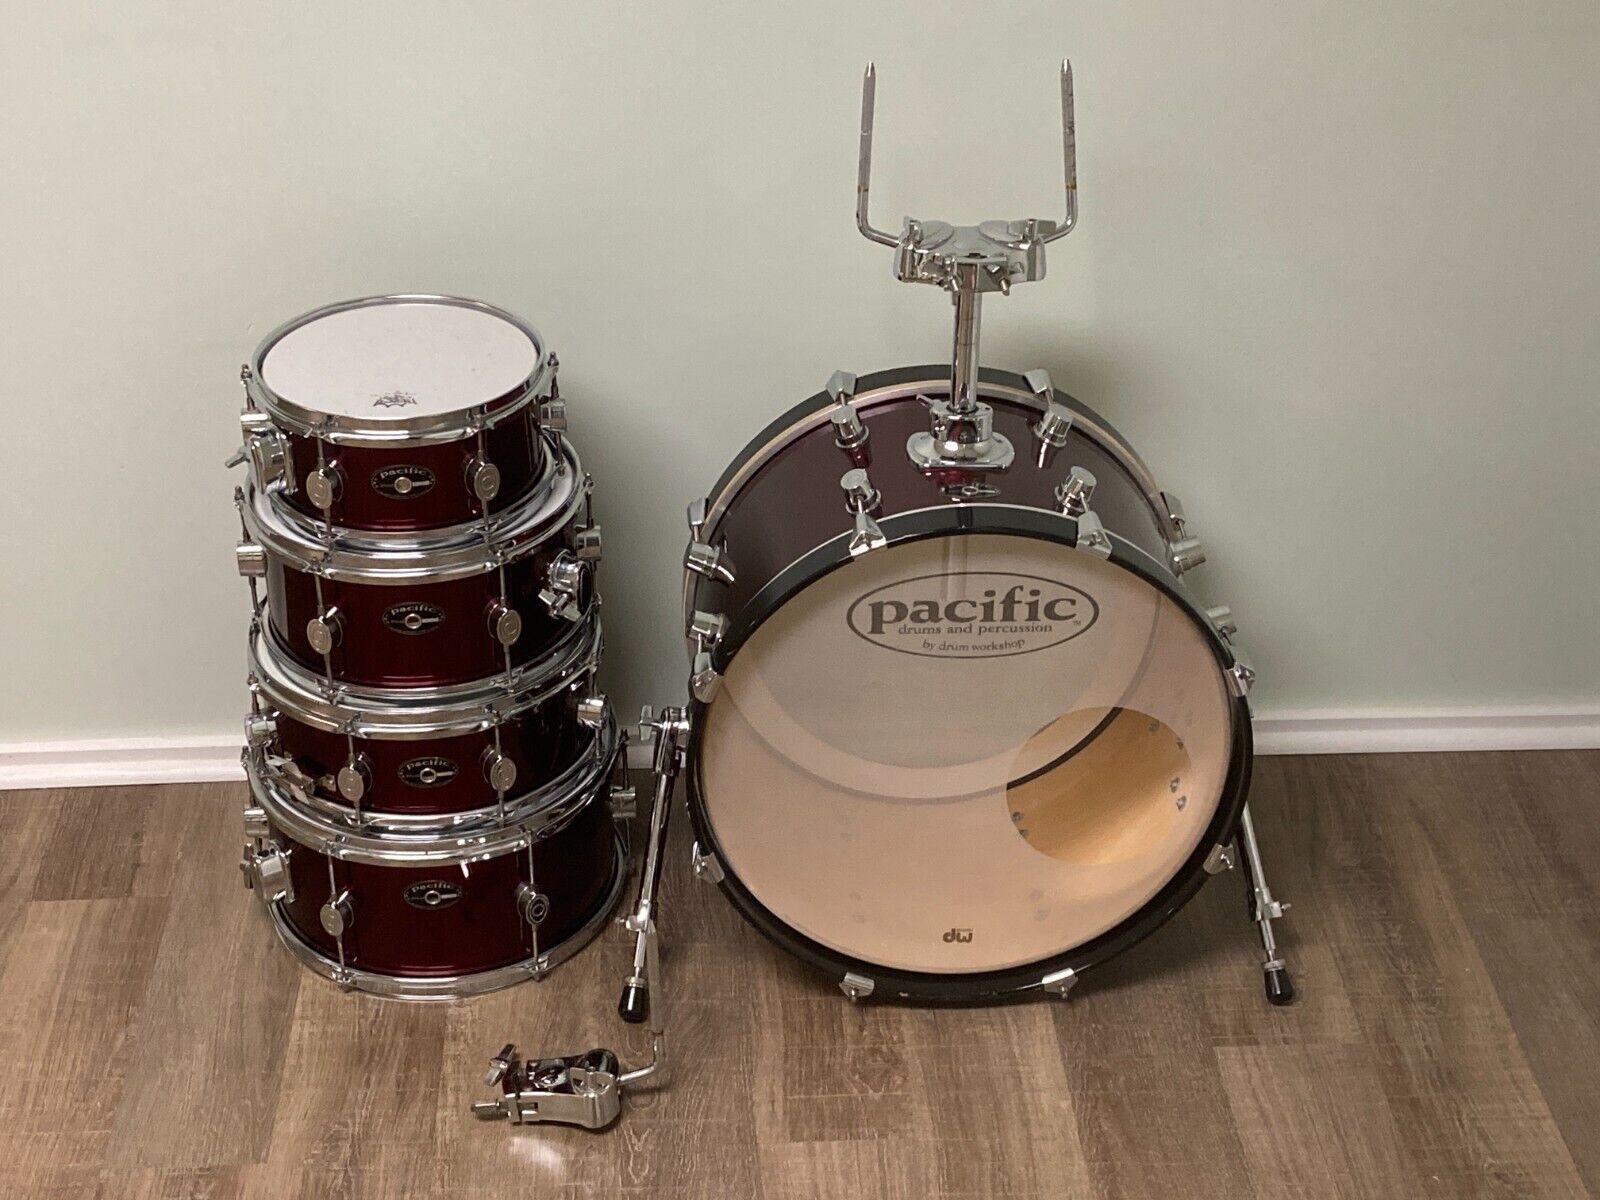 PDP by DW Pacific Chameleon Compact Travel Drum Set 2000s – Wine Red 21